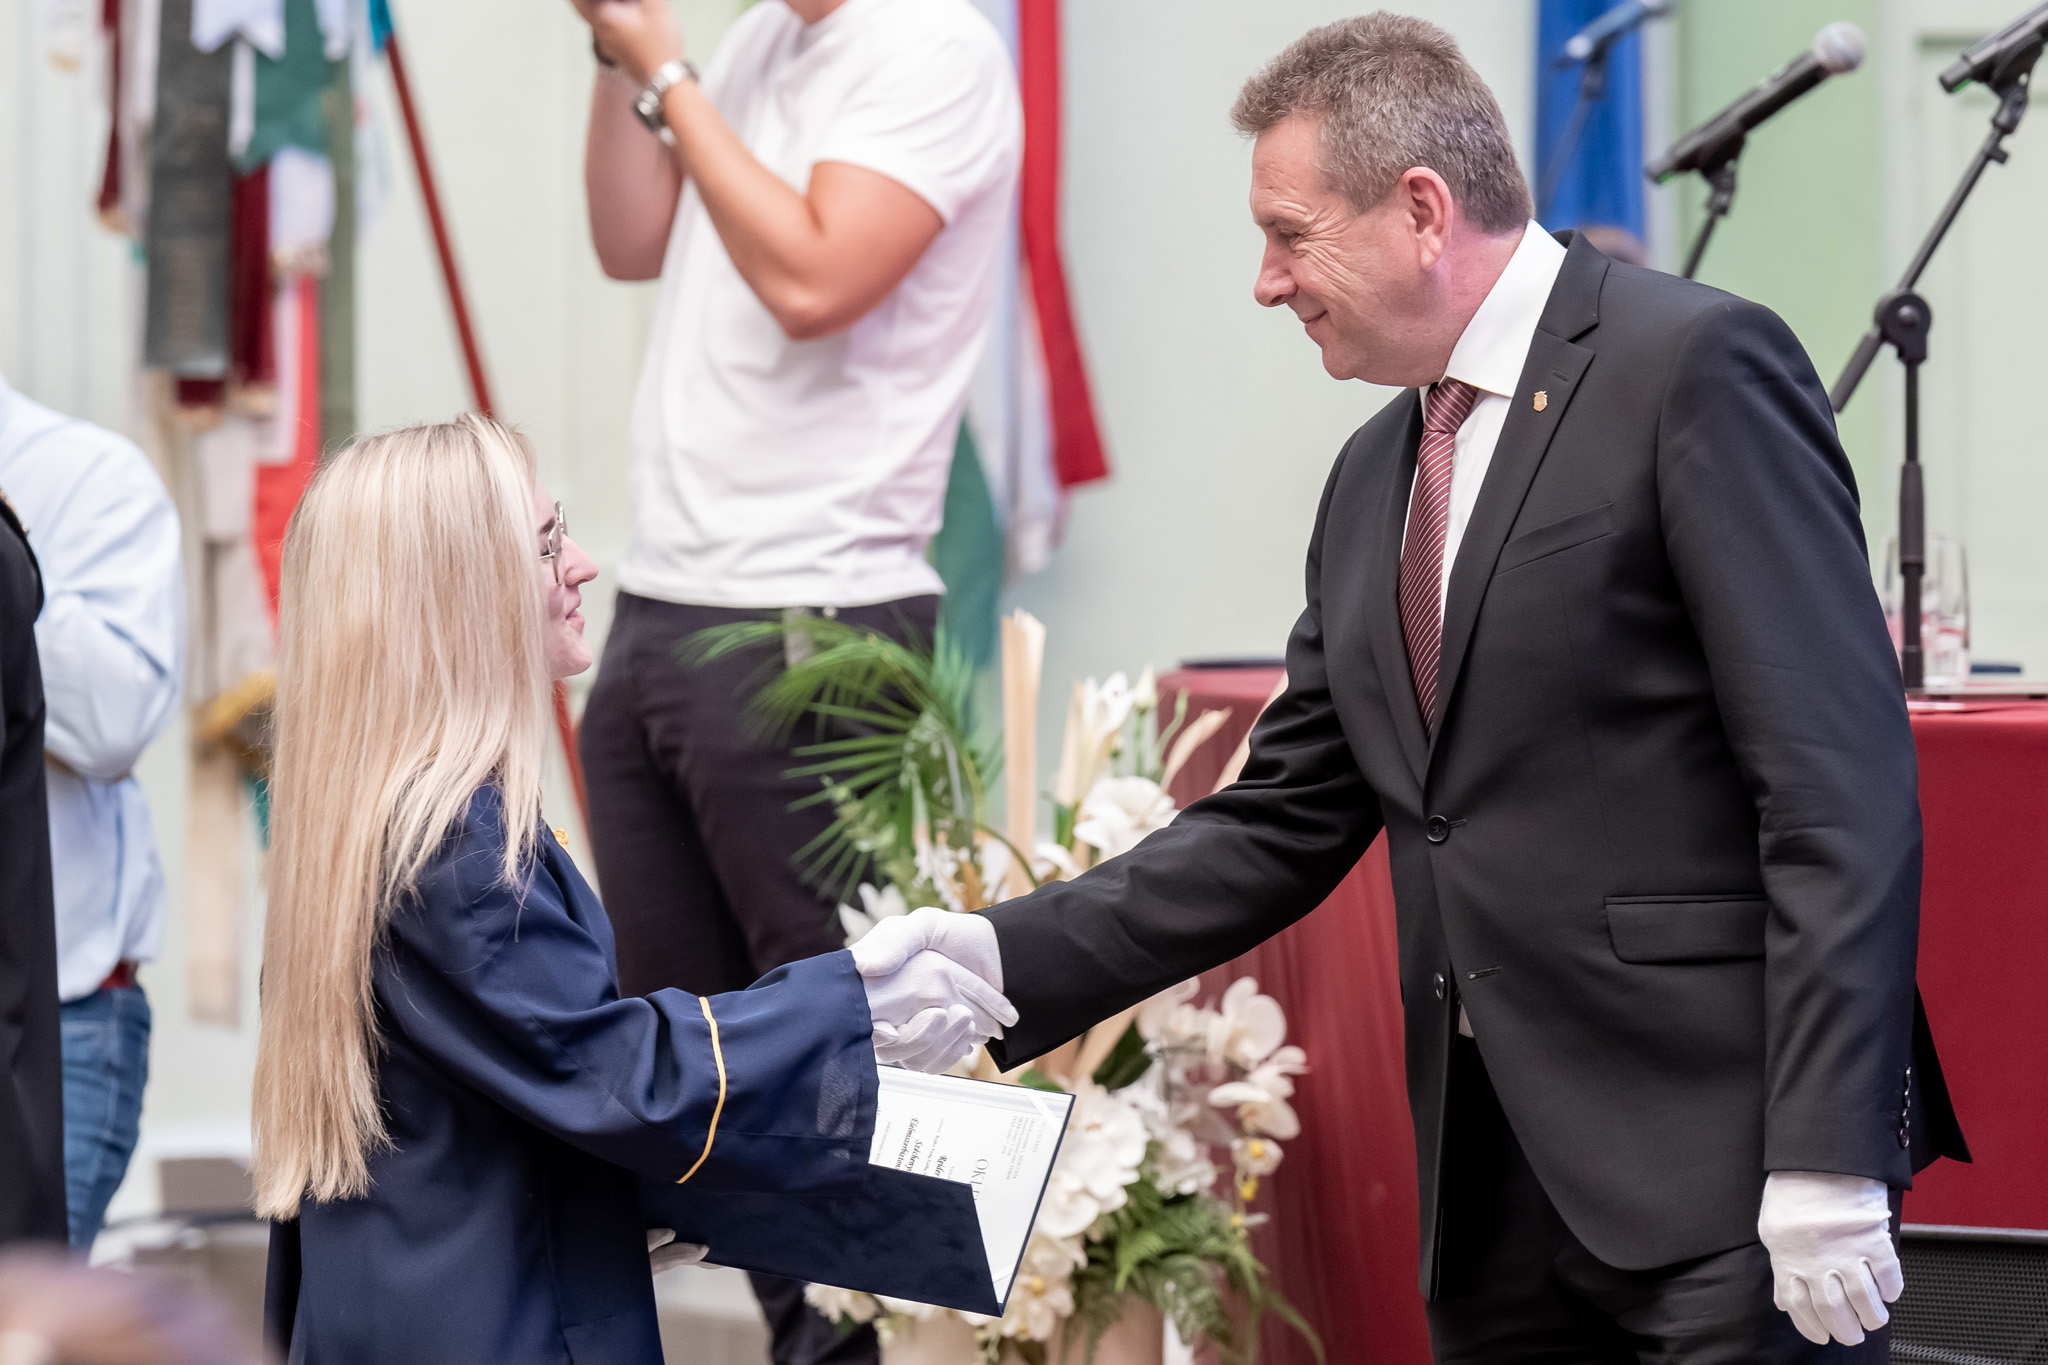 In keeping with Mosonmagyaróvár traditions, the municipality honoured the graduates as honorary citizens of the city.